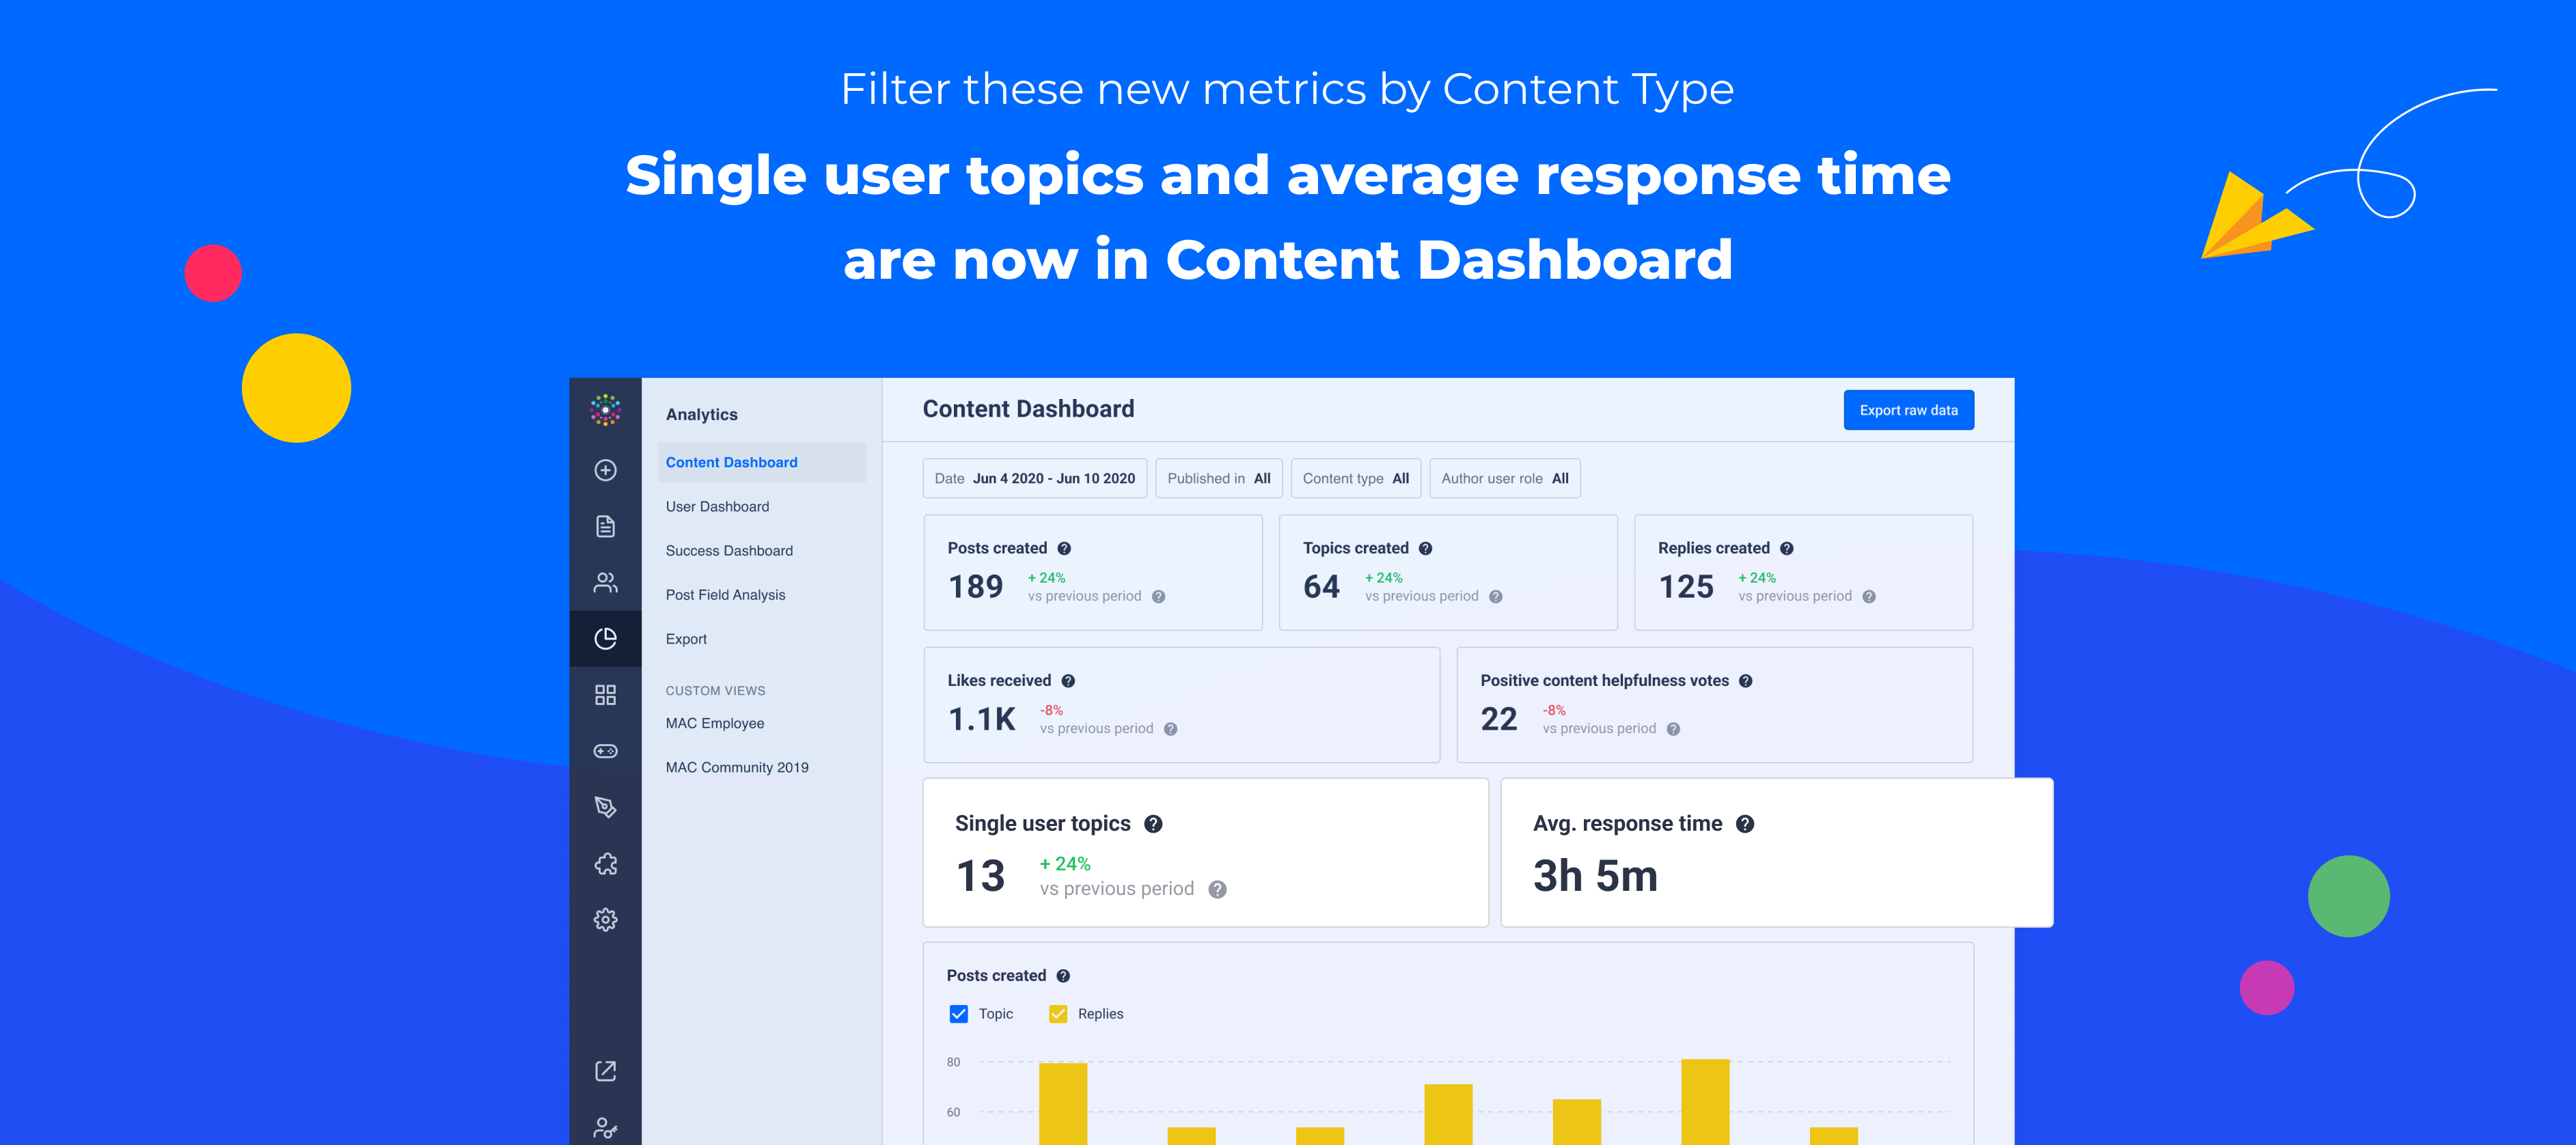 Single user topic and Average response time now can be filtered by Content Type